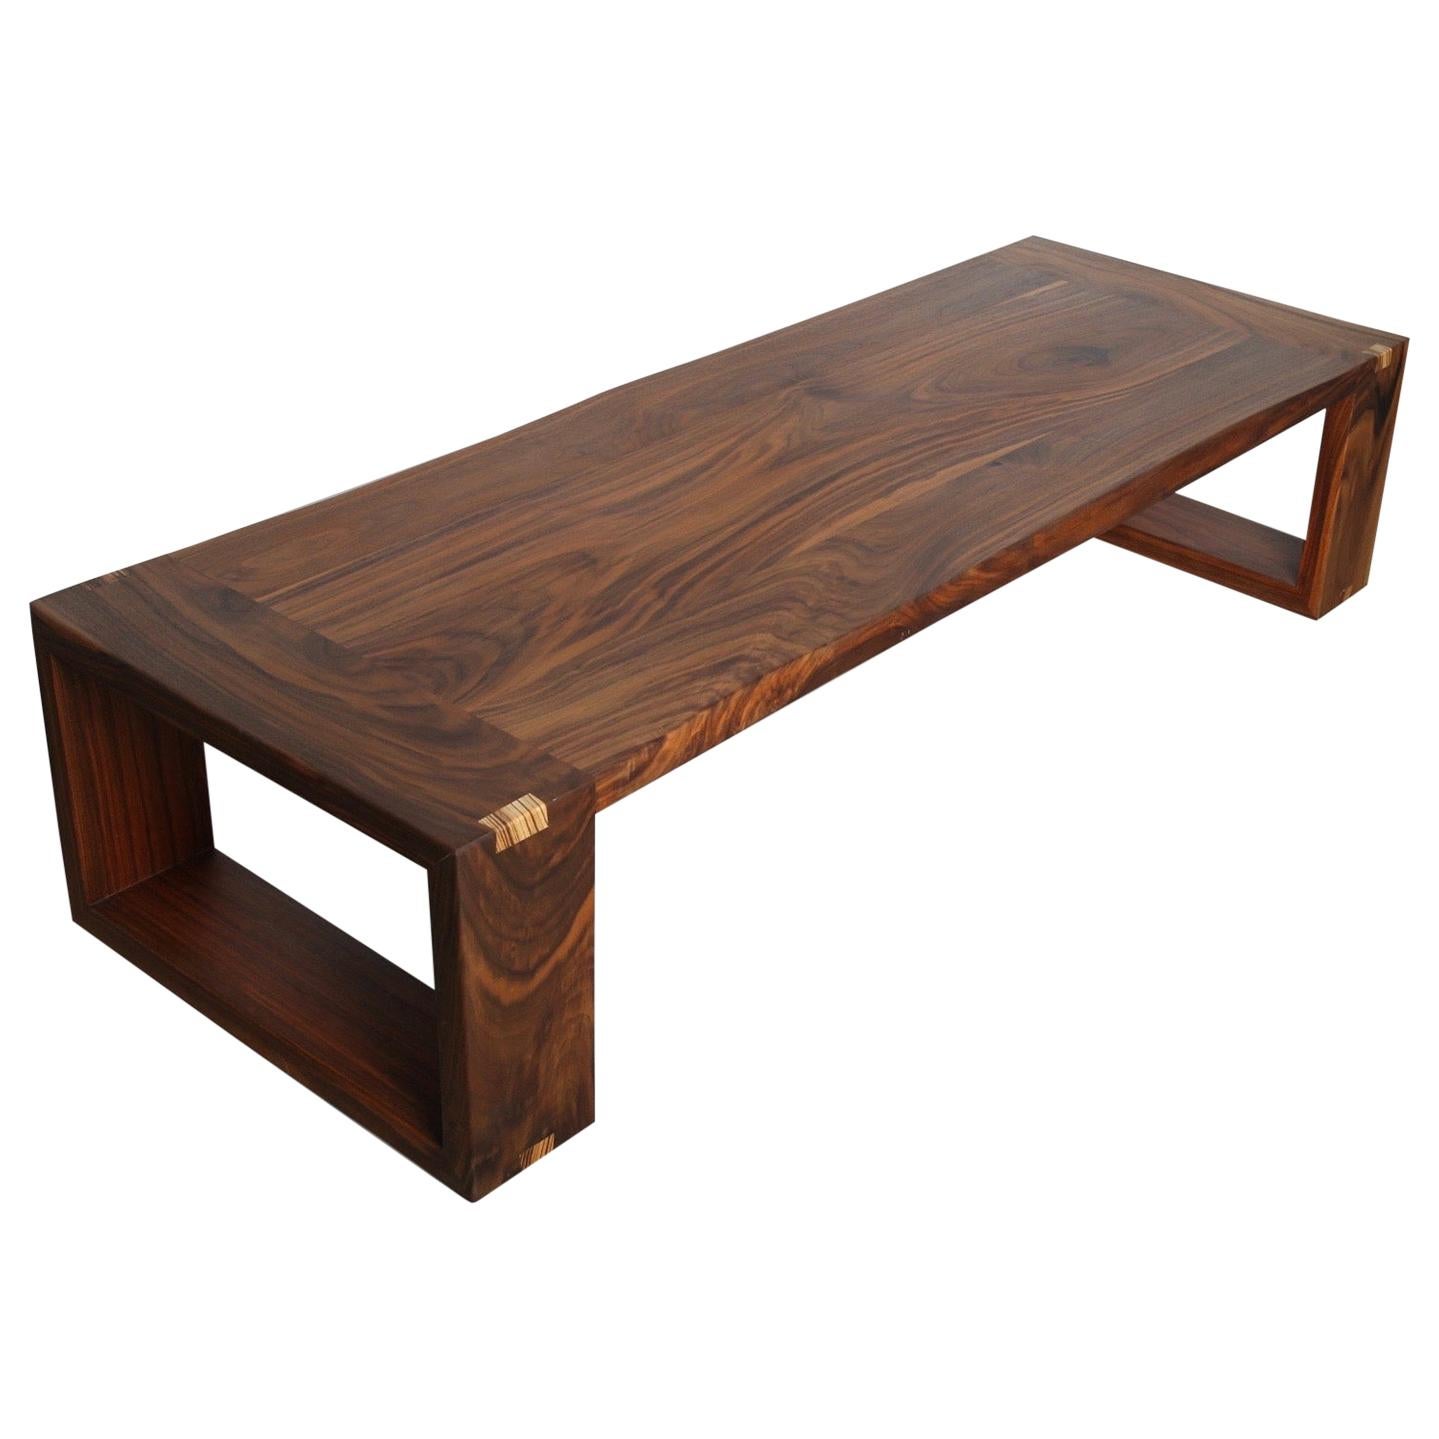 Black Walnut Coffee Table, Natural Edge Detail, in Stock